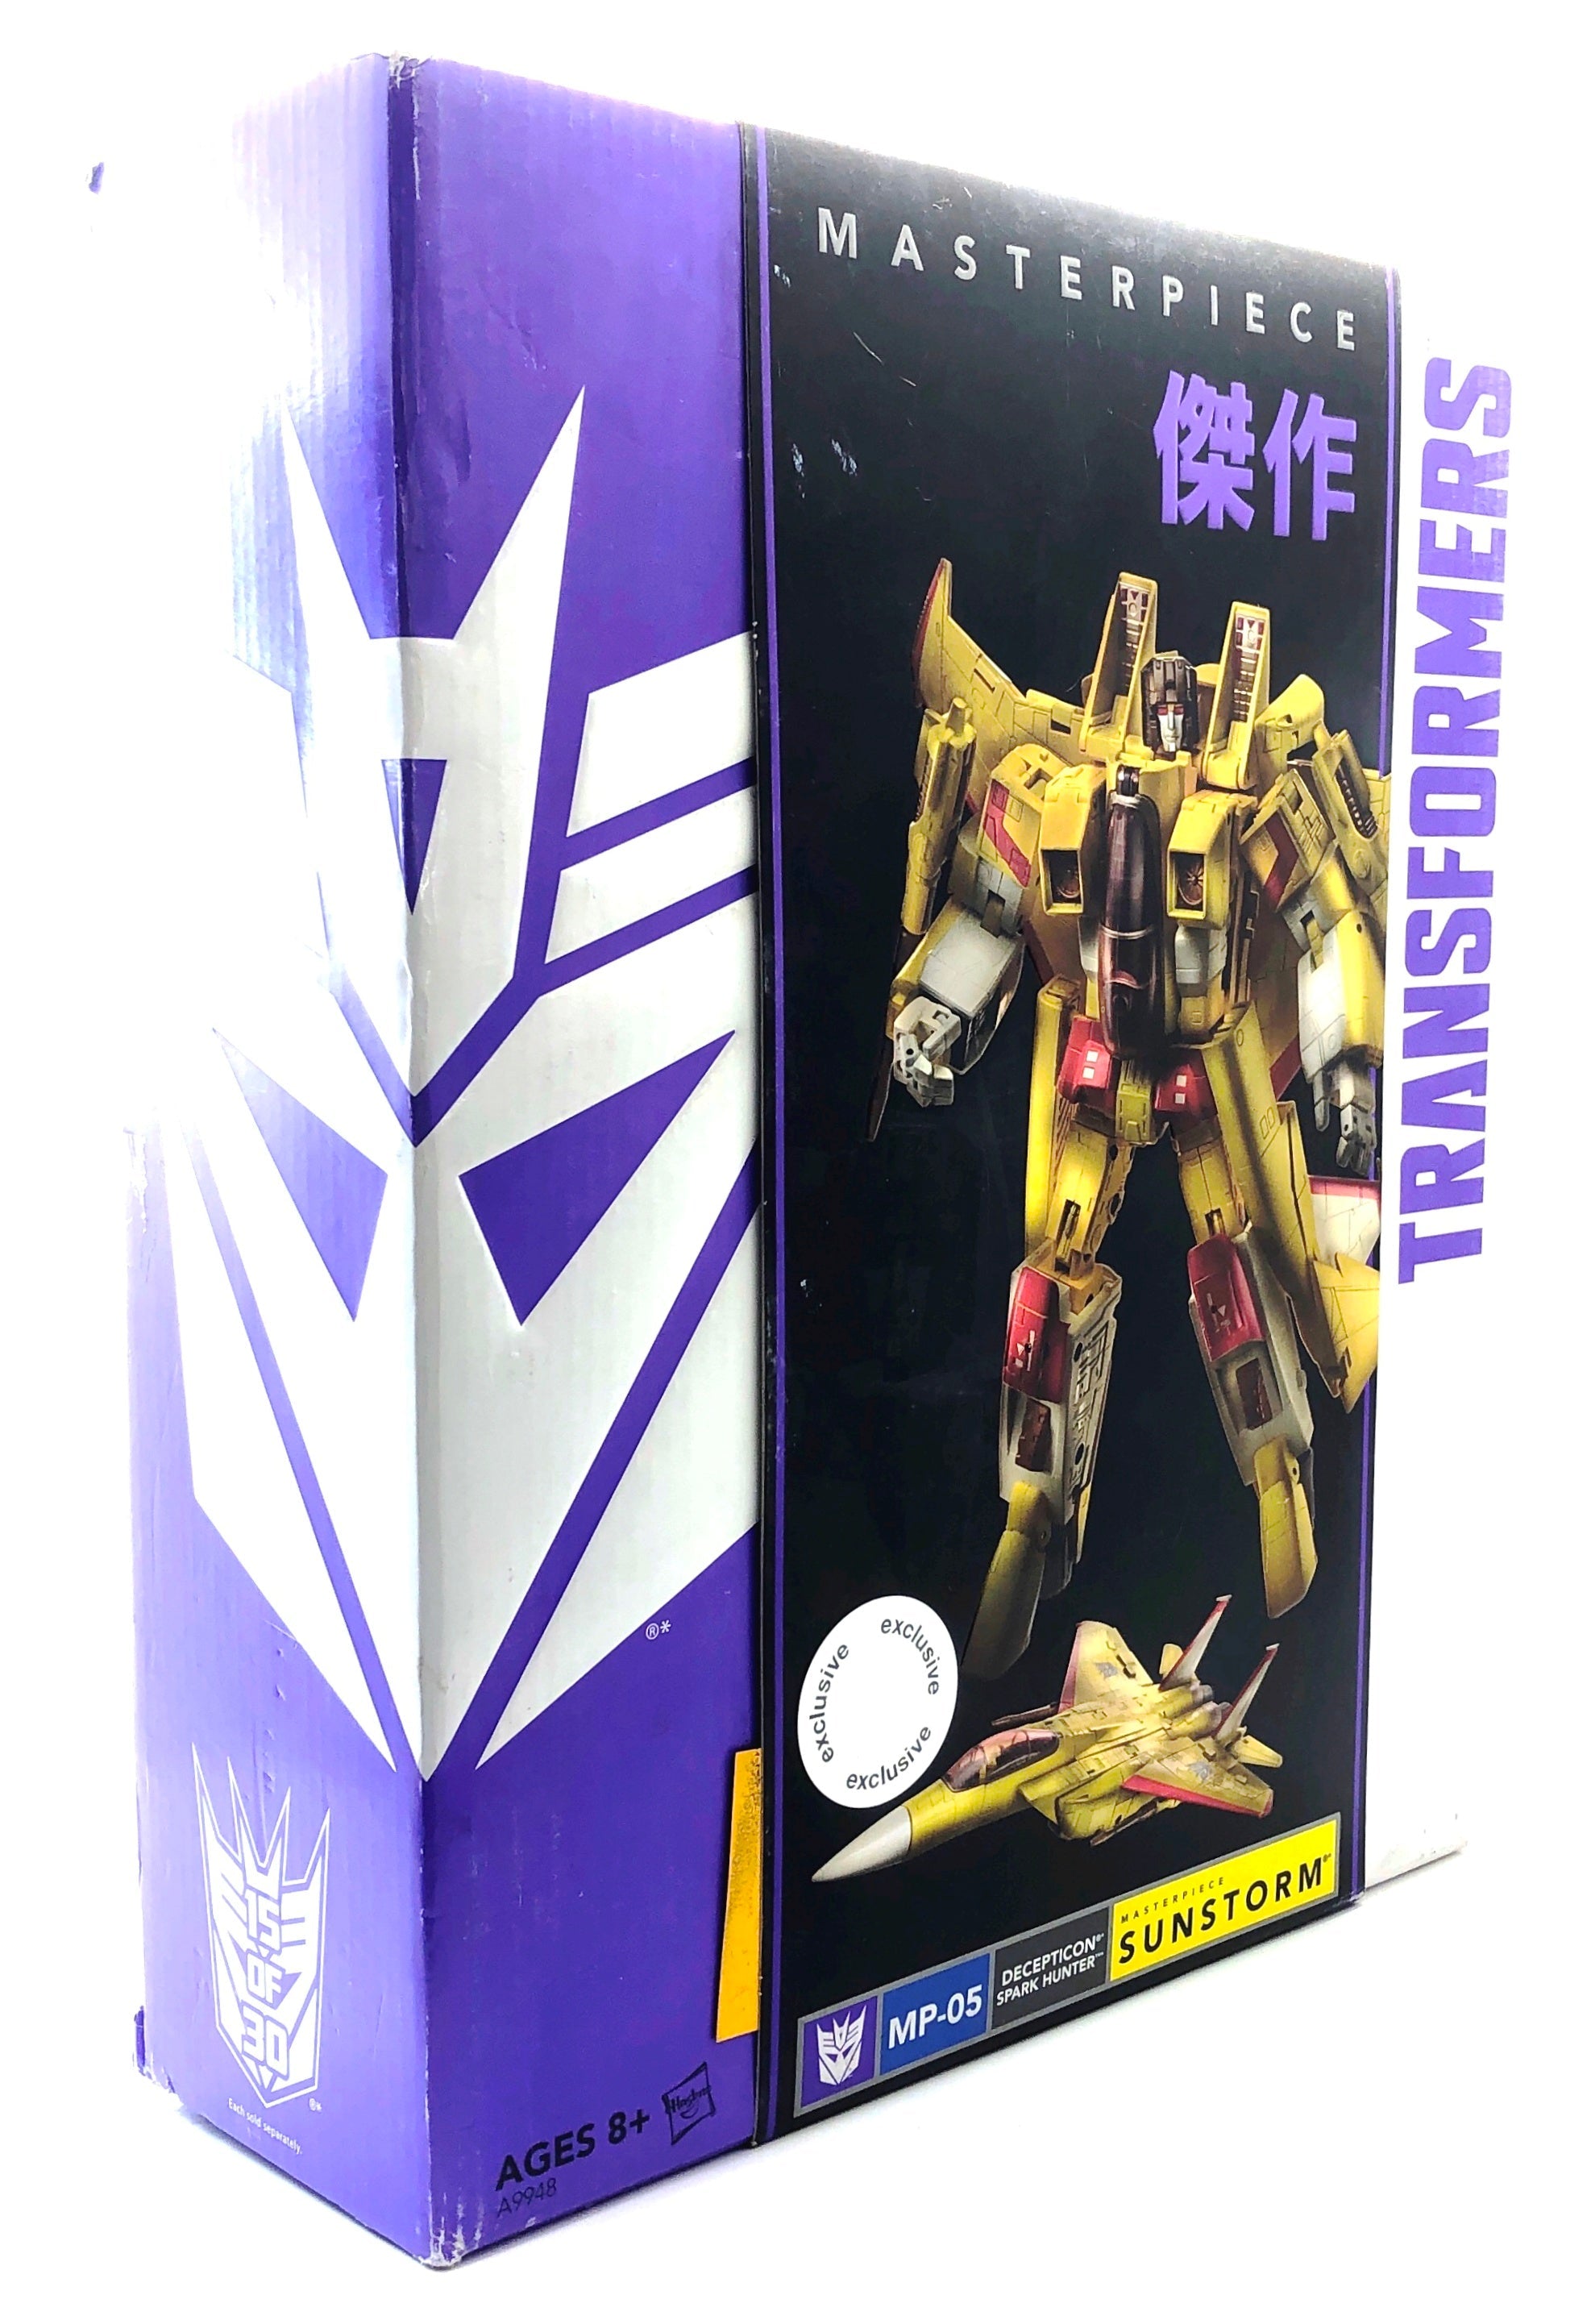 Transformers Masterpiece MP-05 Sunstorm | Toys R Us Exclusive